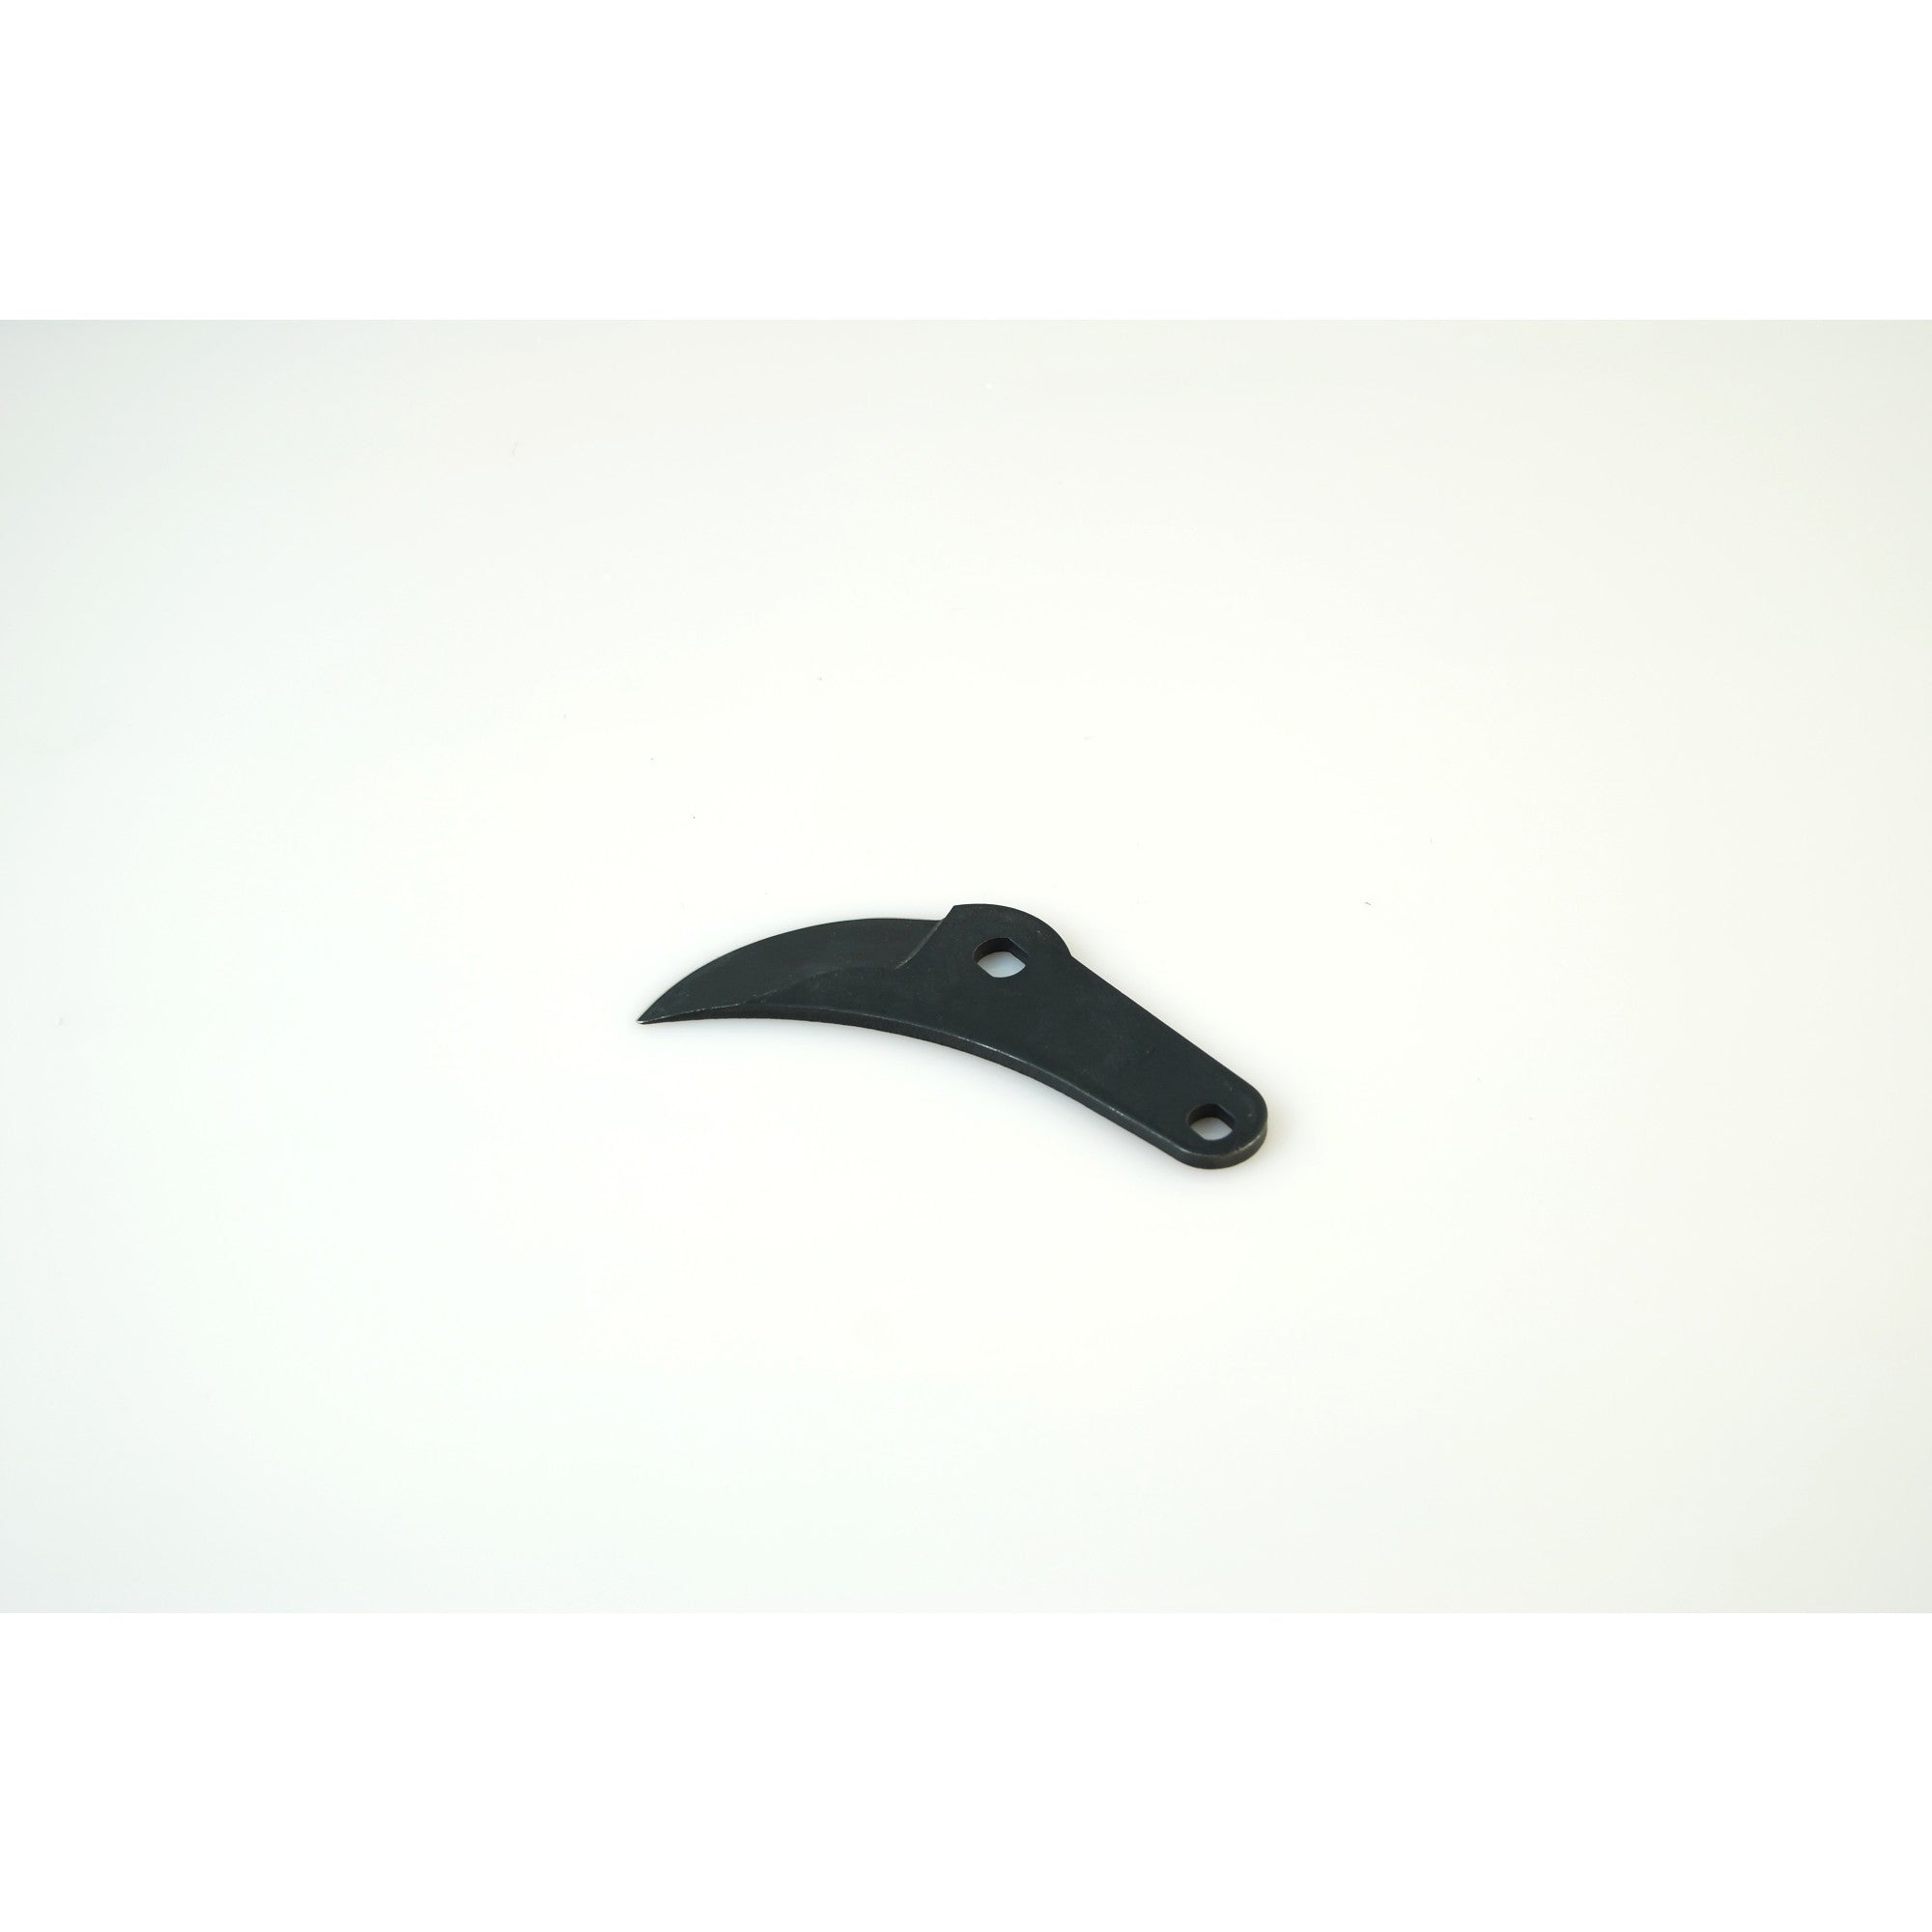 12 in. Replacement Blade for Tree Pruner